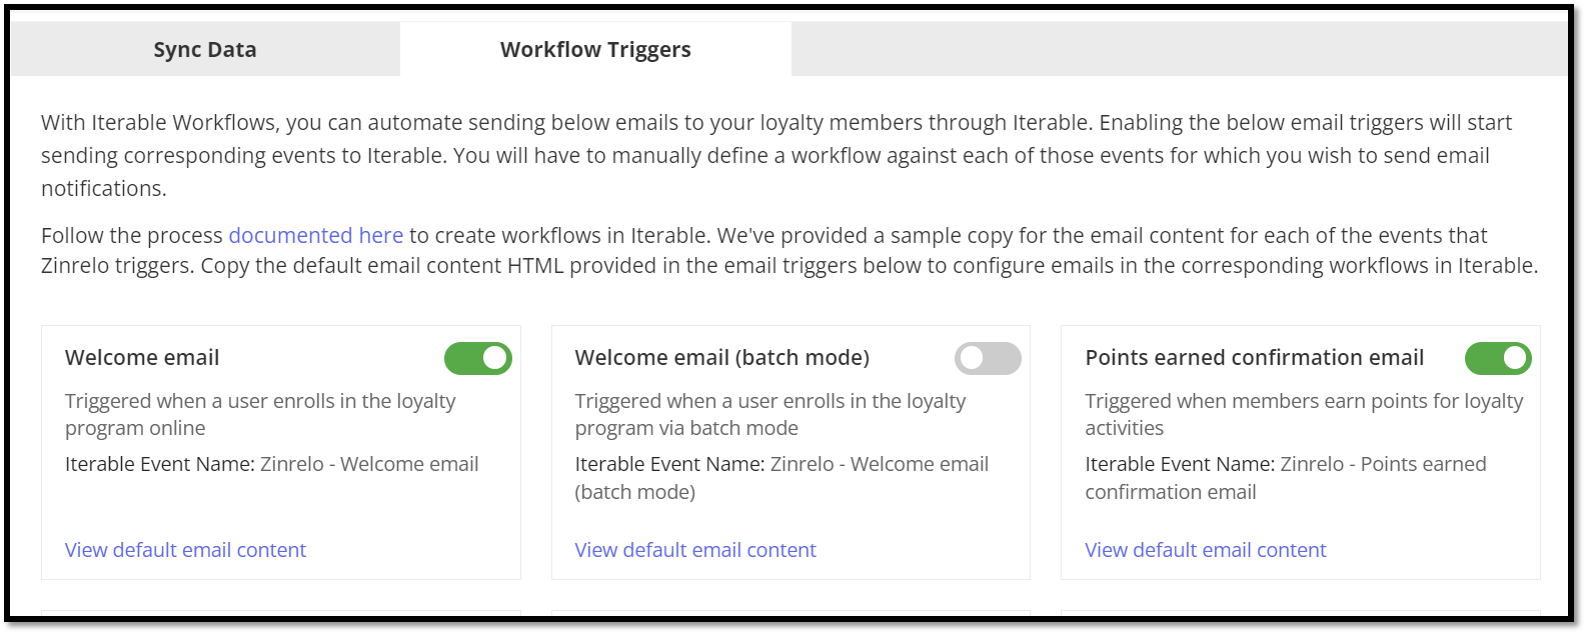 Workflow Triggers